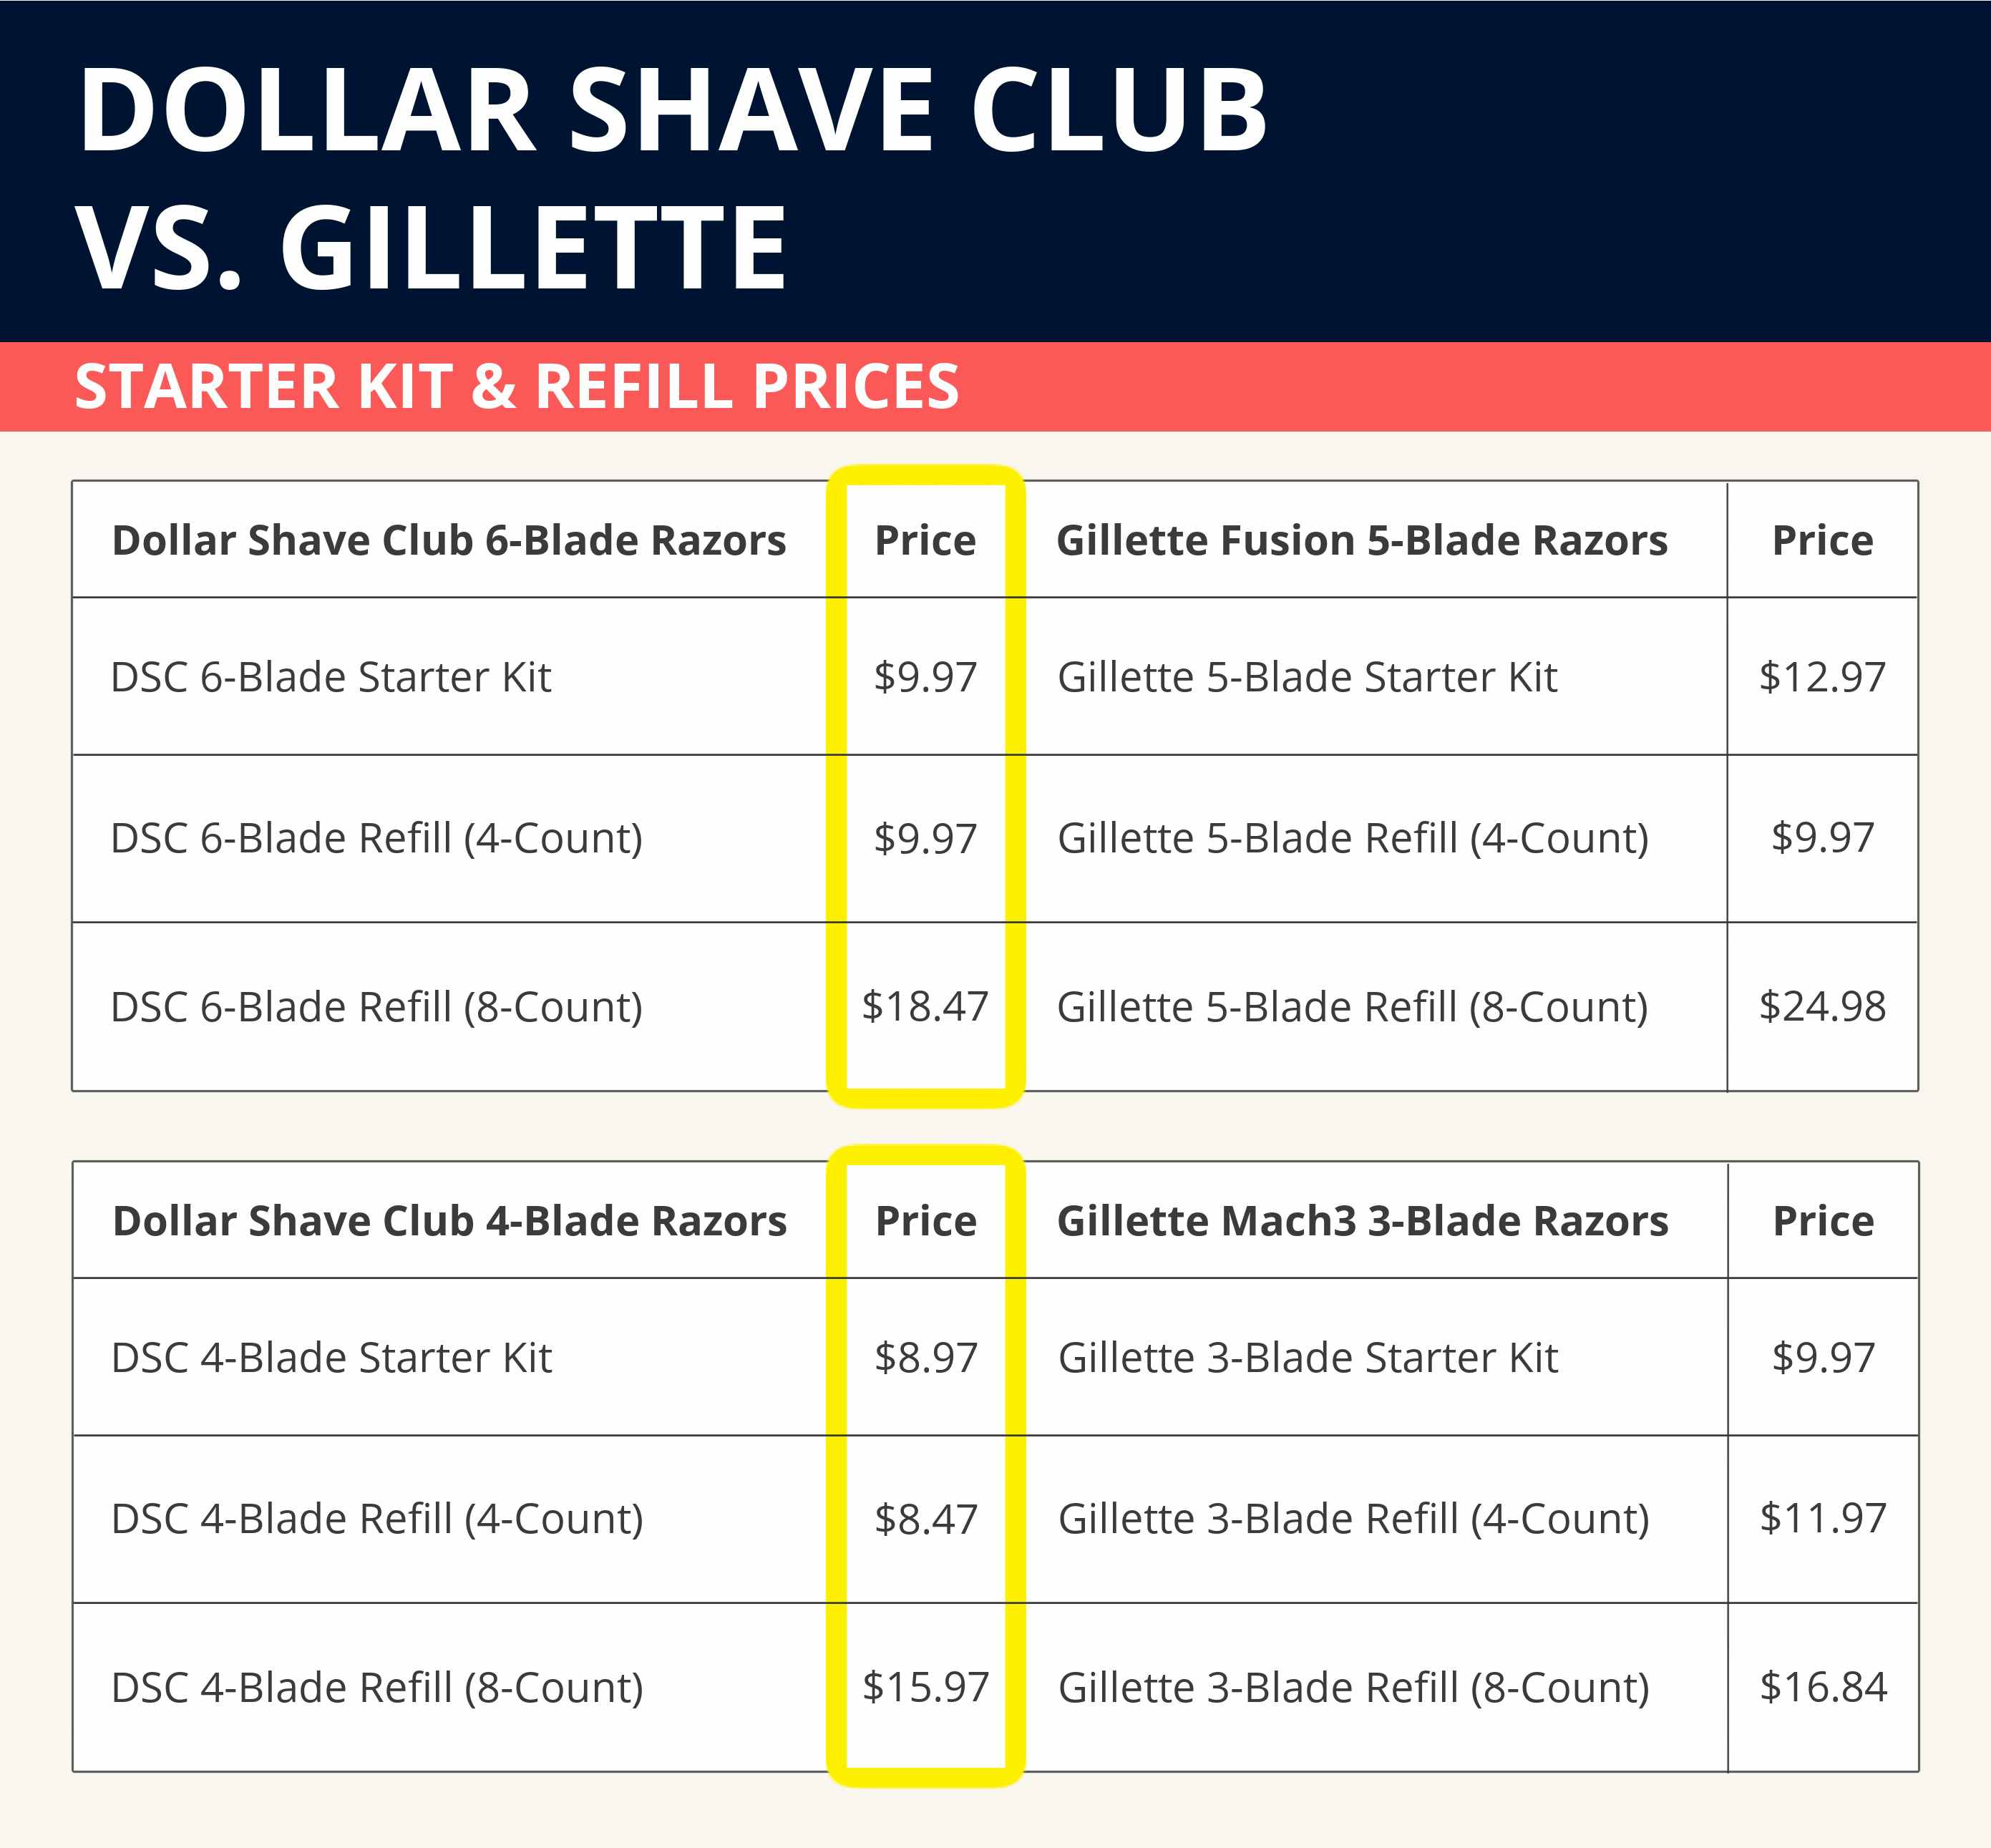 A graphic comparing the prices of Dollar Shave Club 6-blade and 4-blade razors to Gillette's 5-blade and 3-blade razors, showing that Dollar Shave Club razors are cheaper across the board